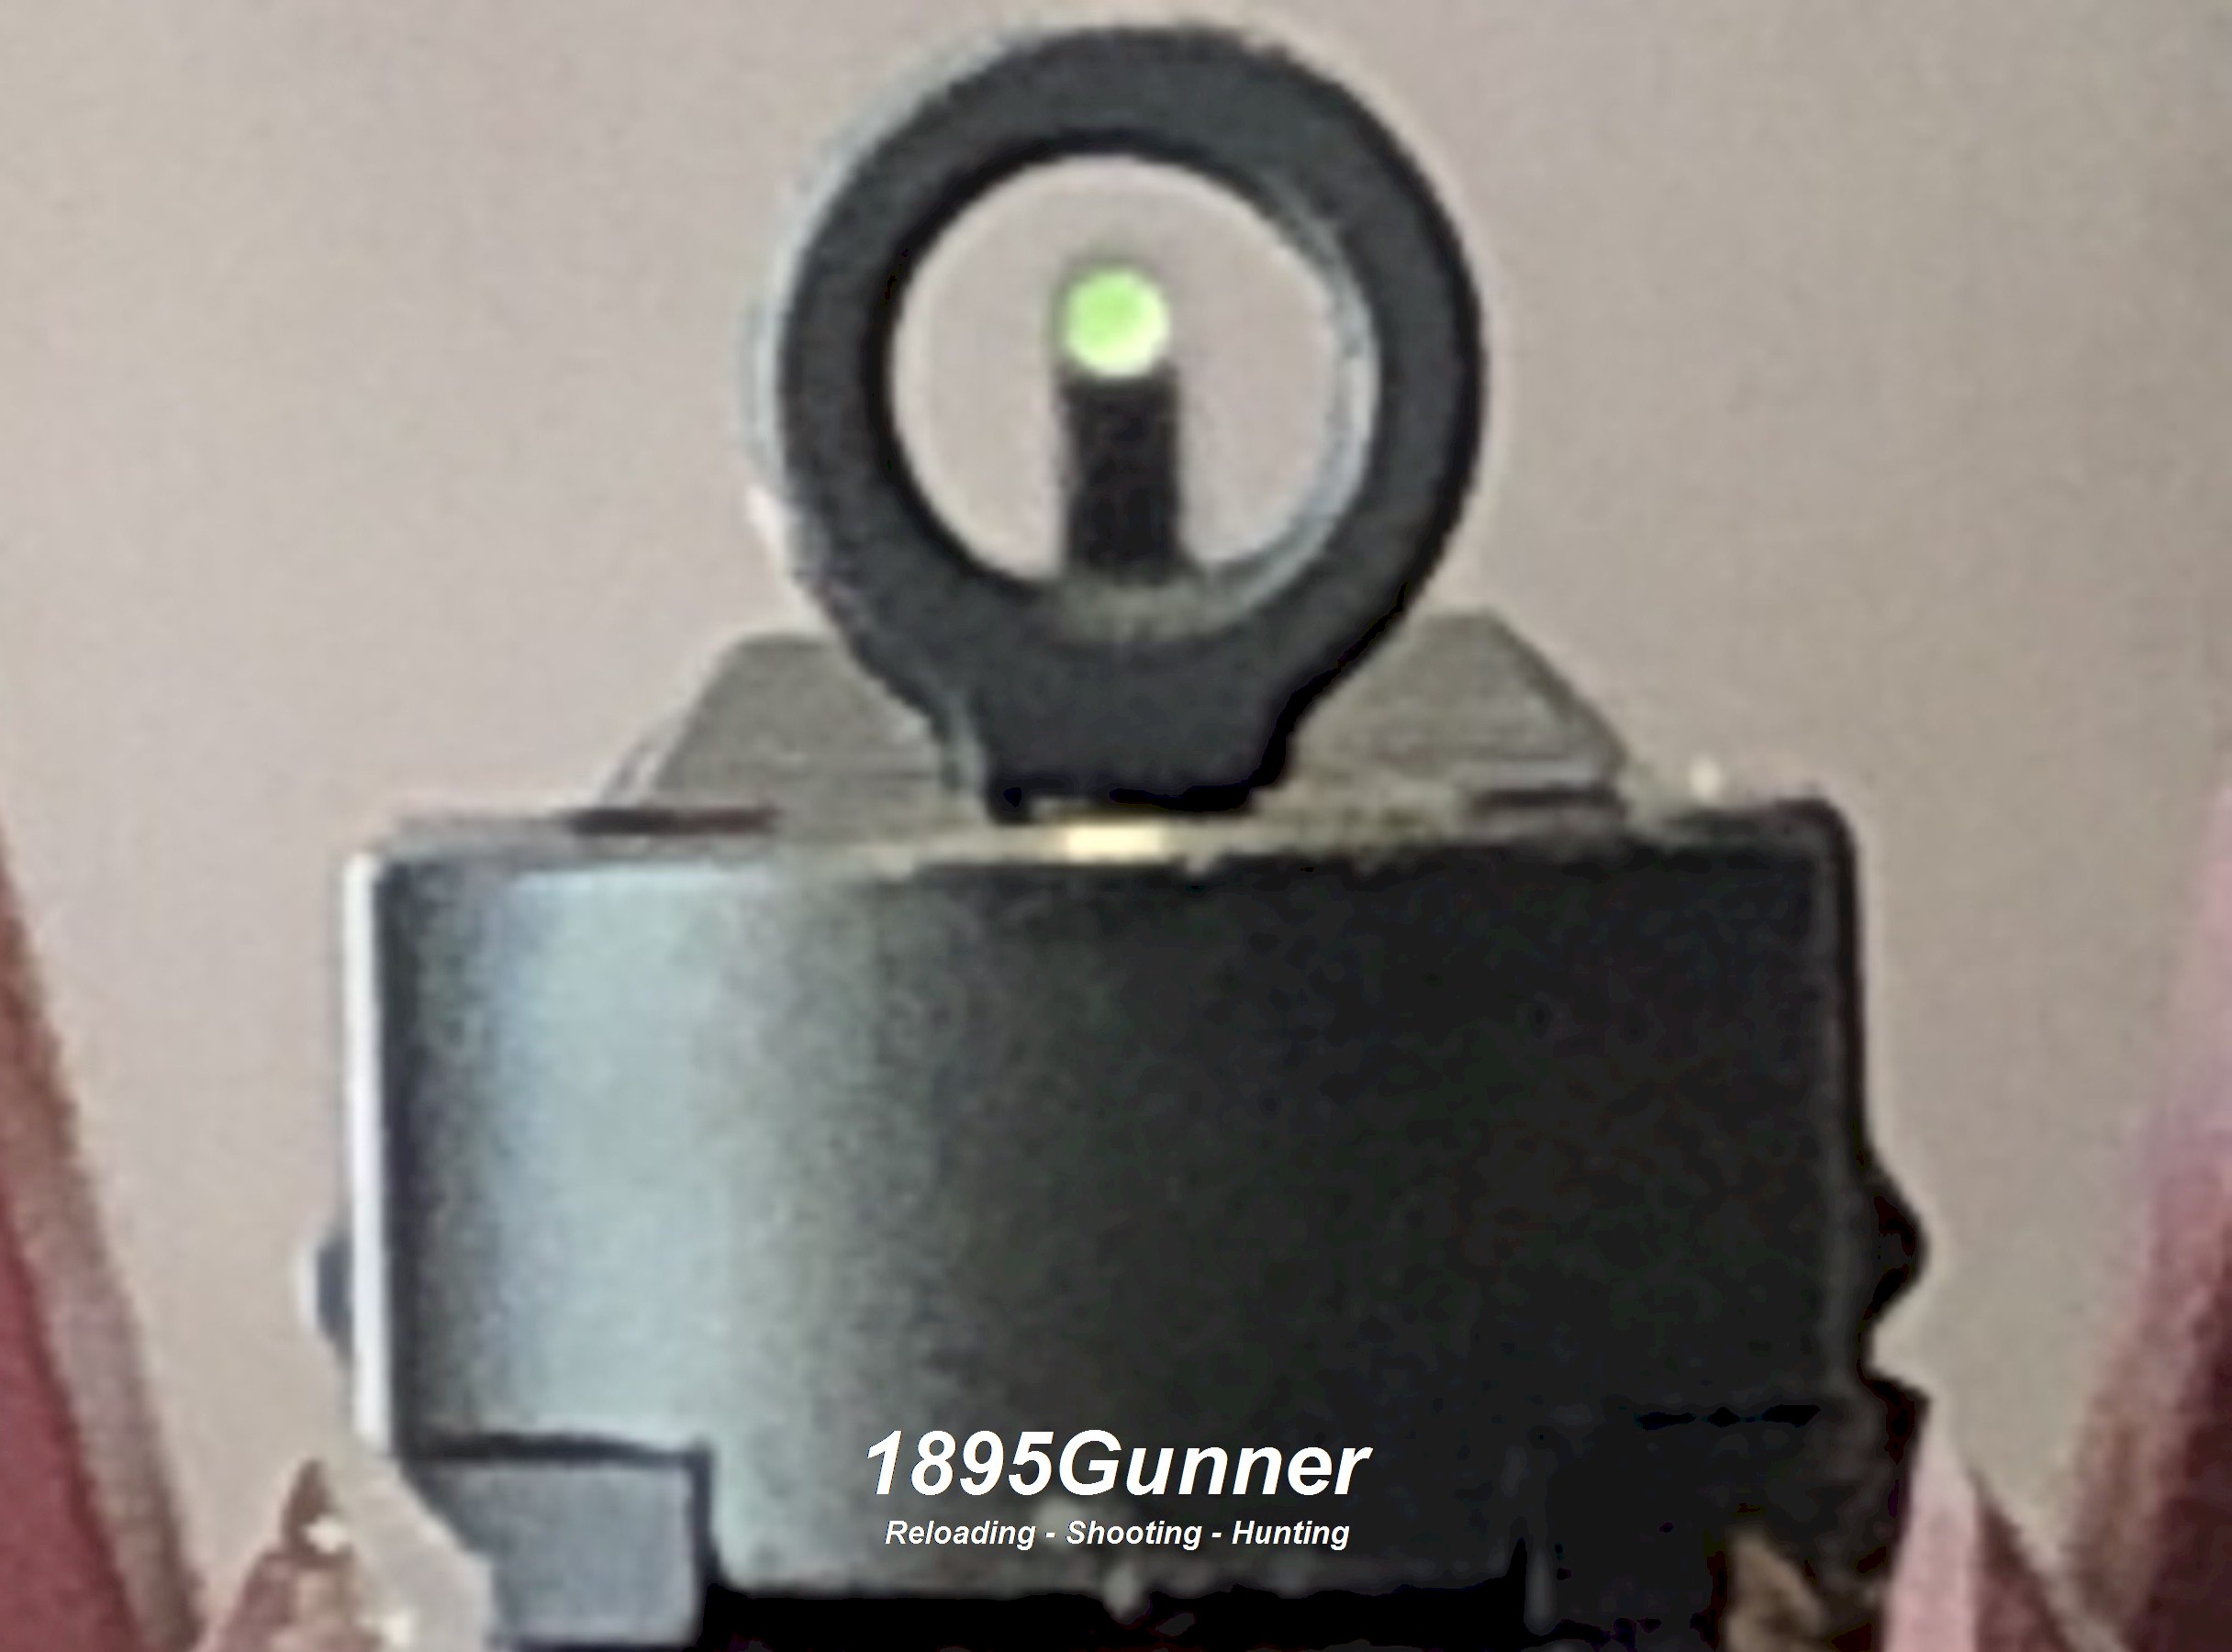 The Ghost Ring Rear and and tritium fiber optic, high visibility day/night front sight